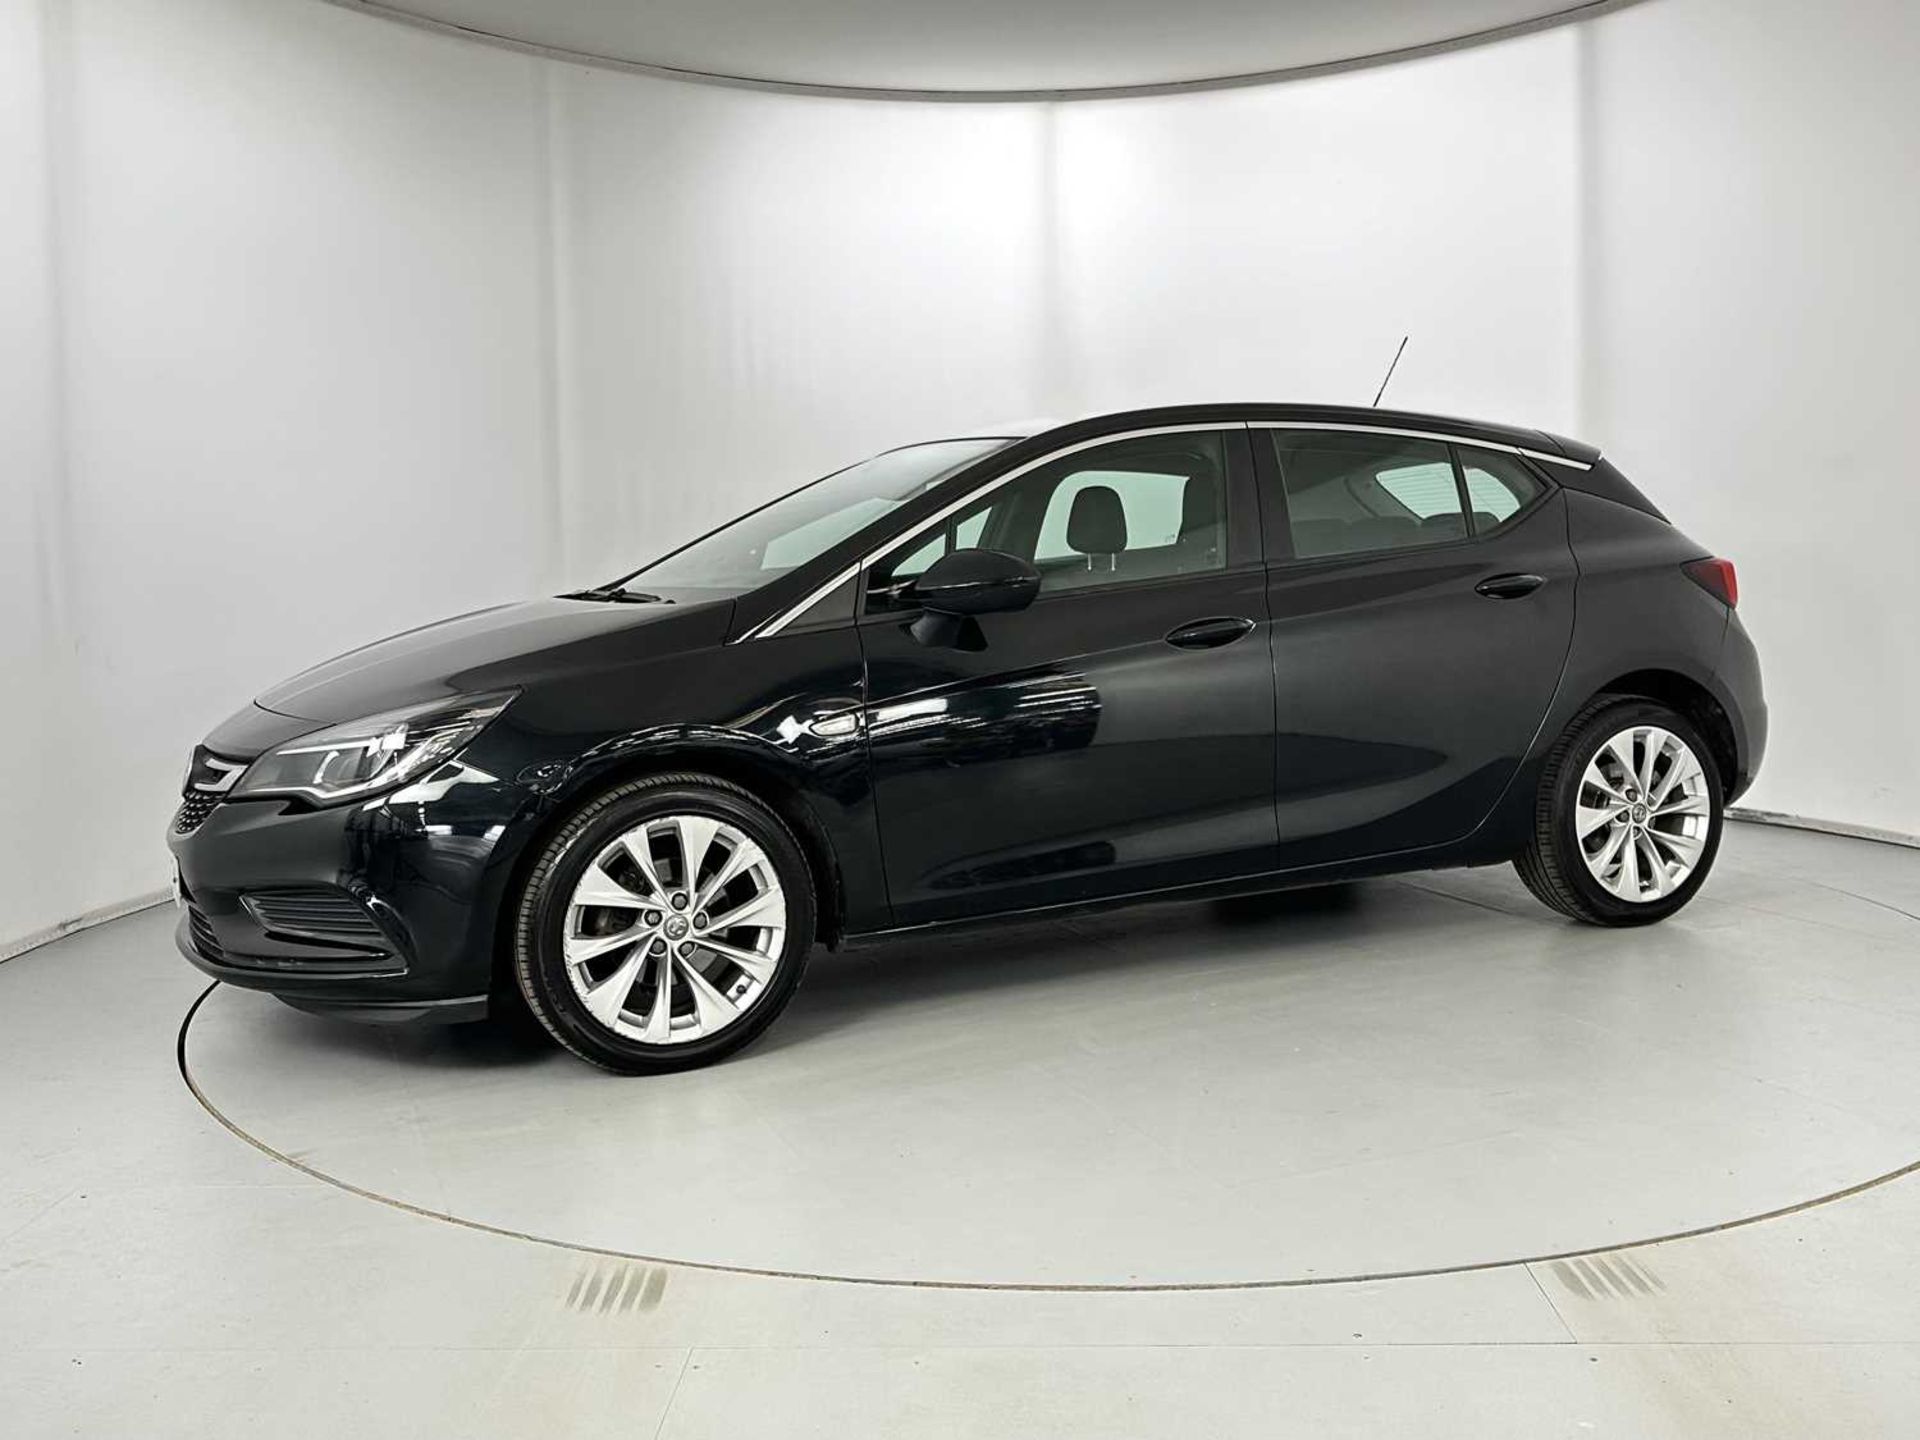 2016 Vauxhall Astra - Image 4 of 34